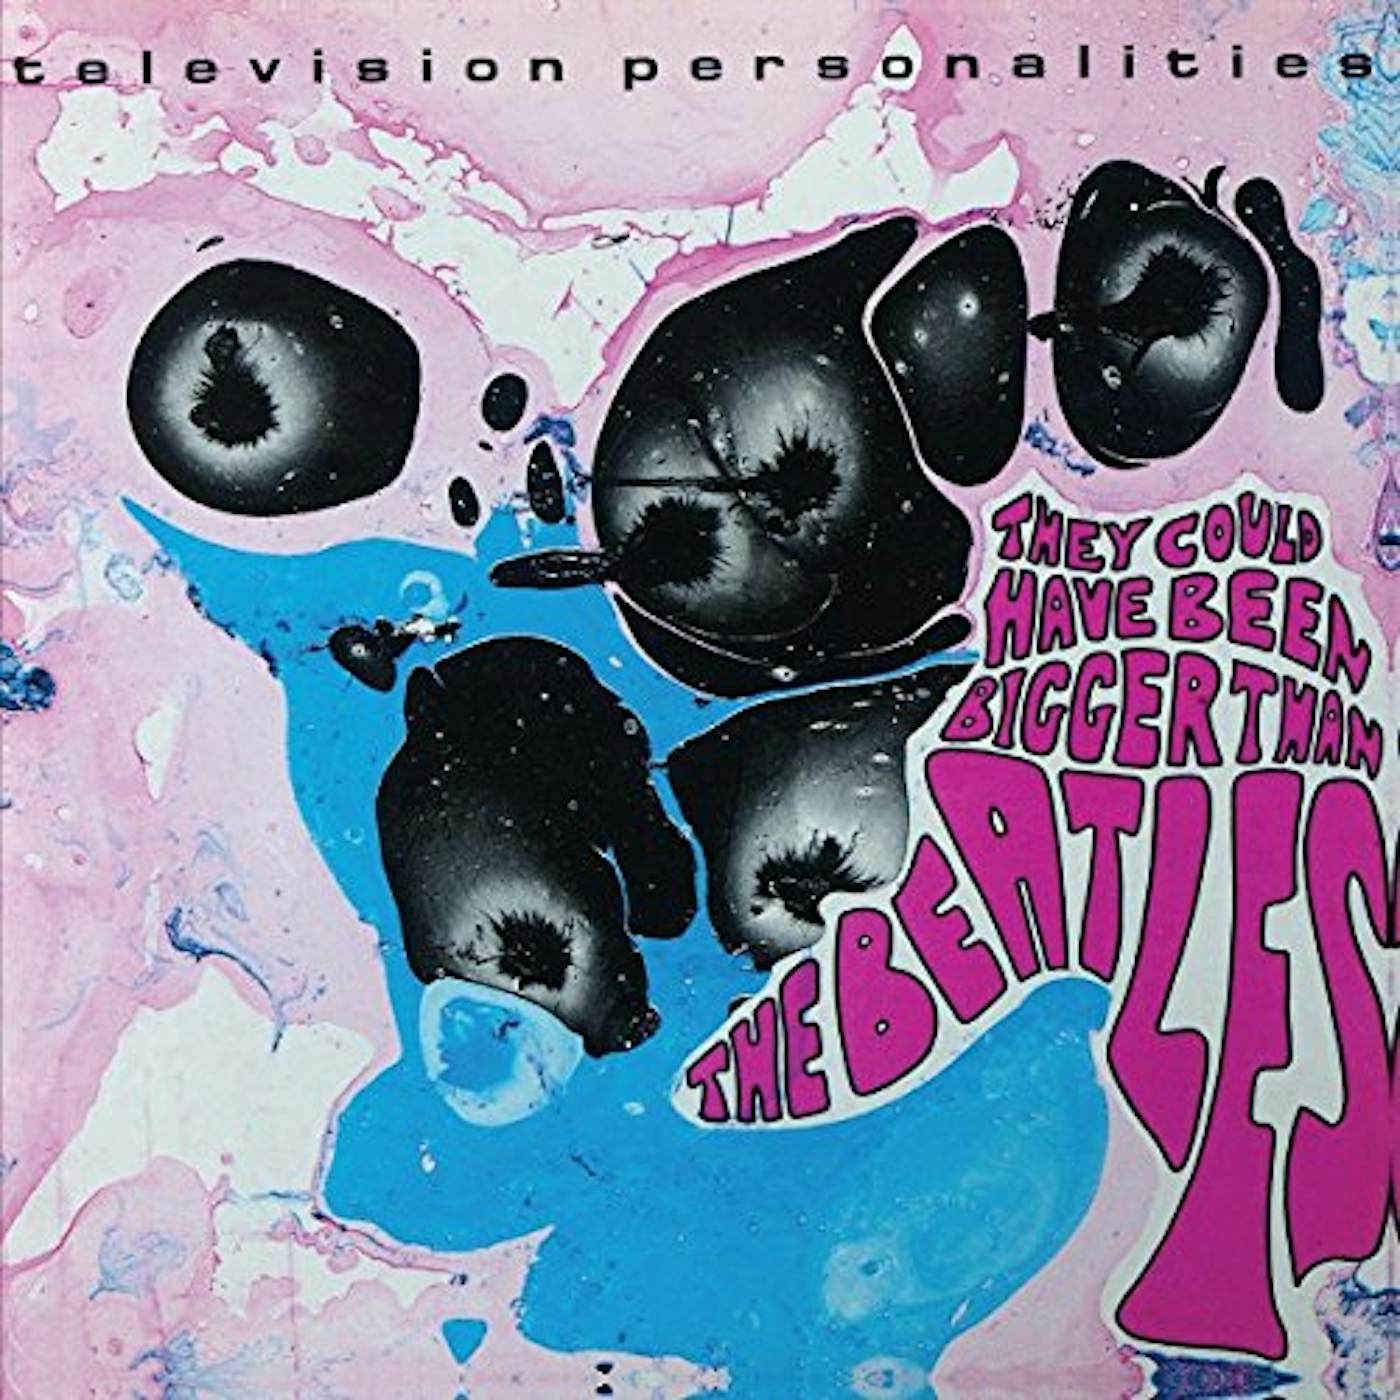 Television Personalities THEY COUD HAVE BEEN BIGGER THAN THE BEATLES Vinyl Record